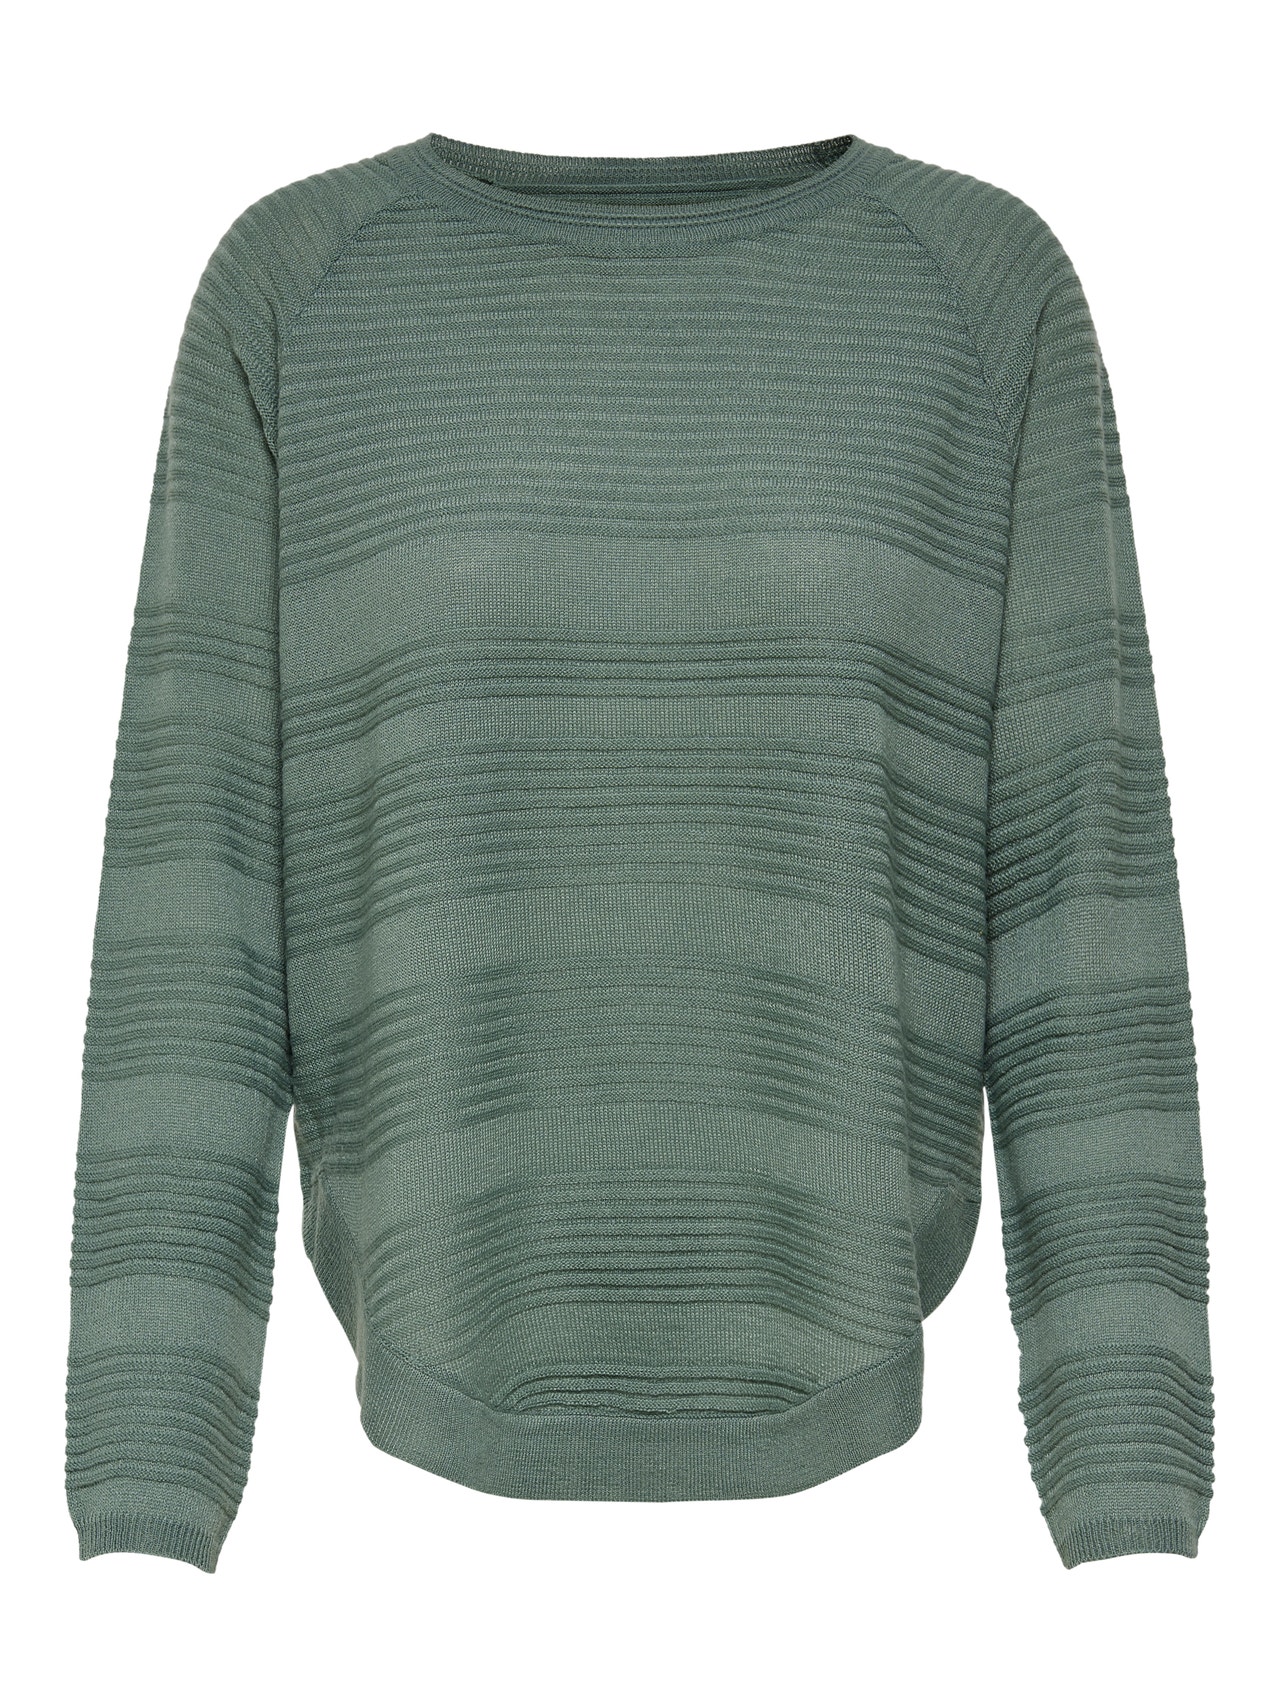 ONLY Texture Knitted Pullover -Chinois Green - 15141866